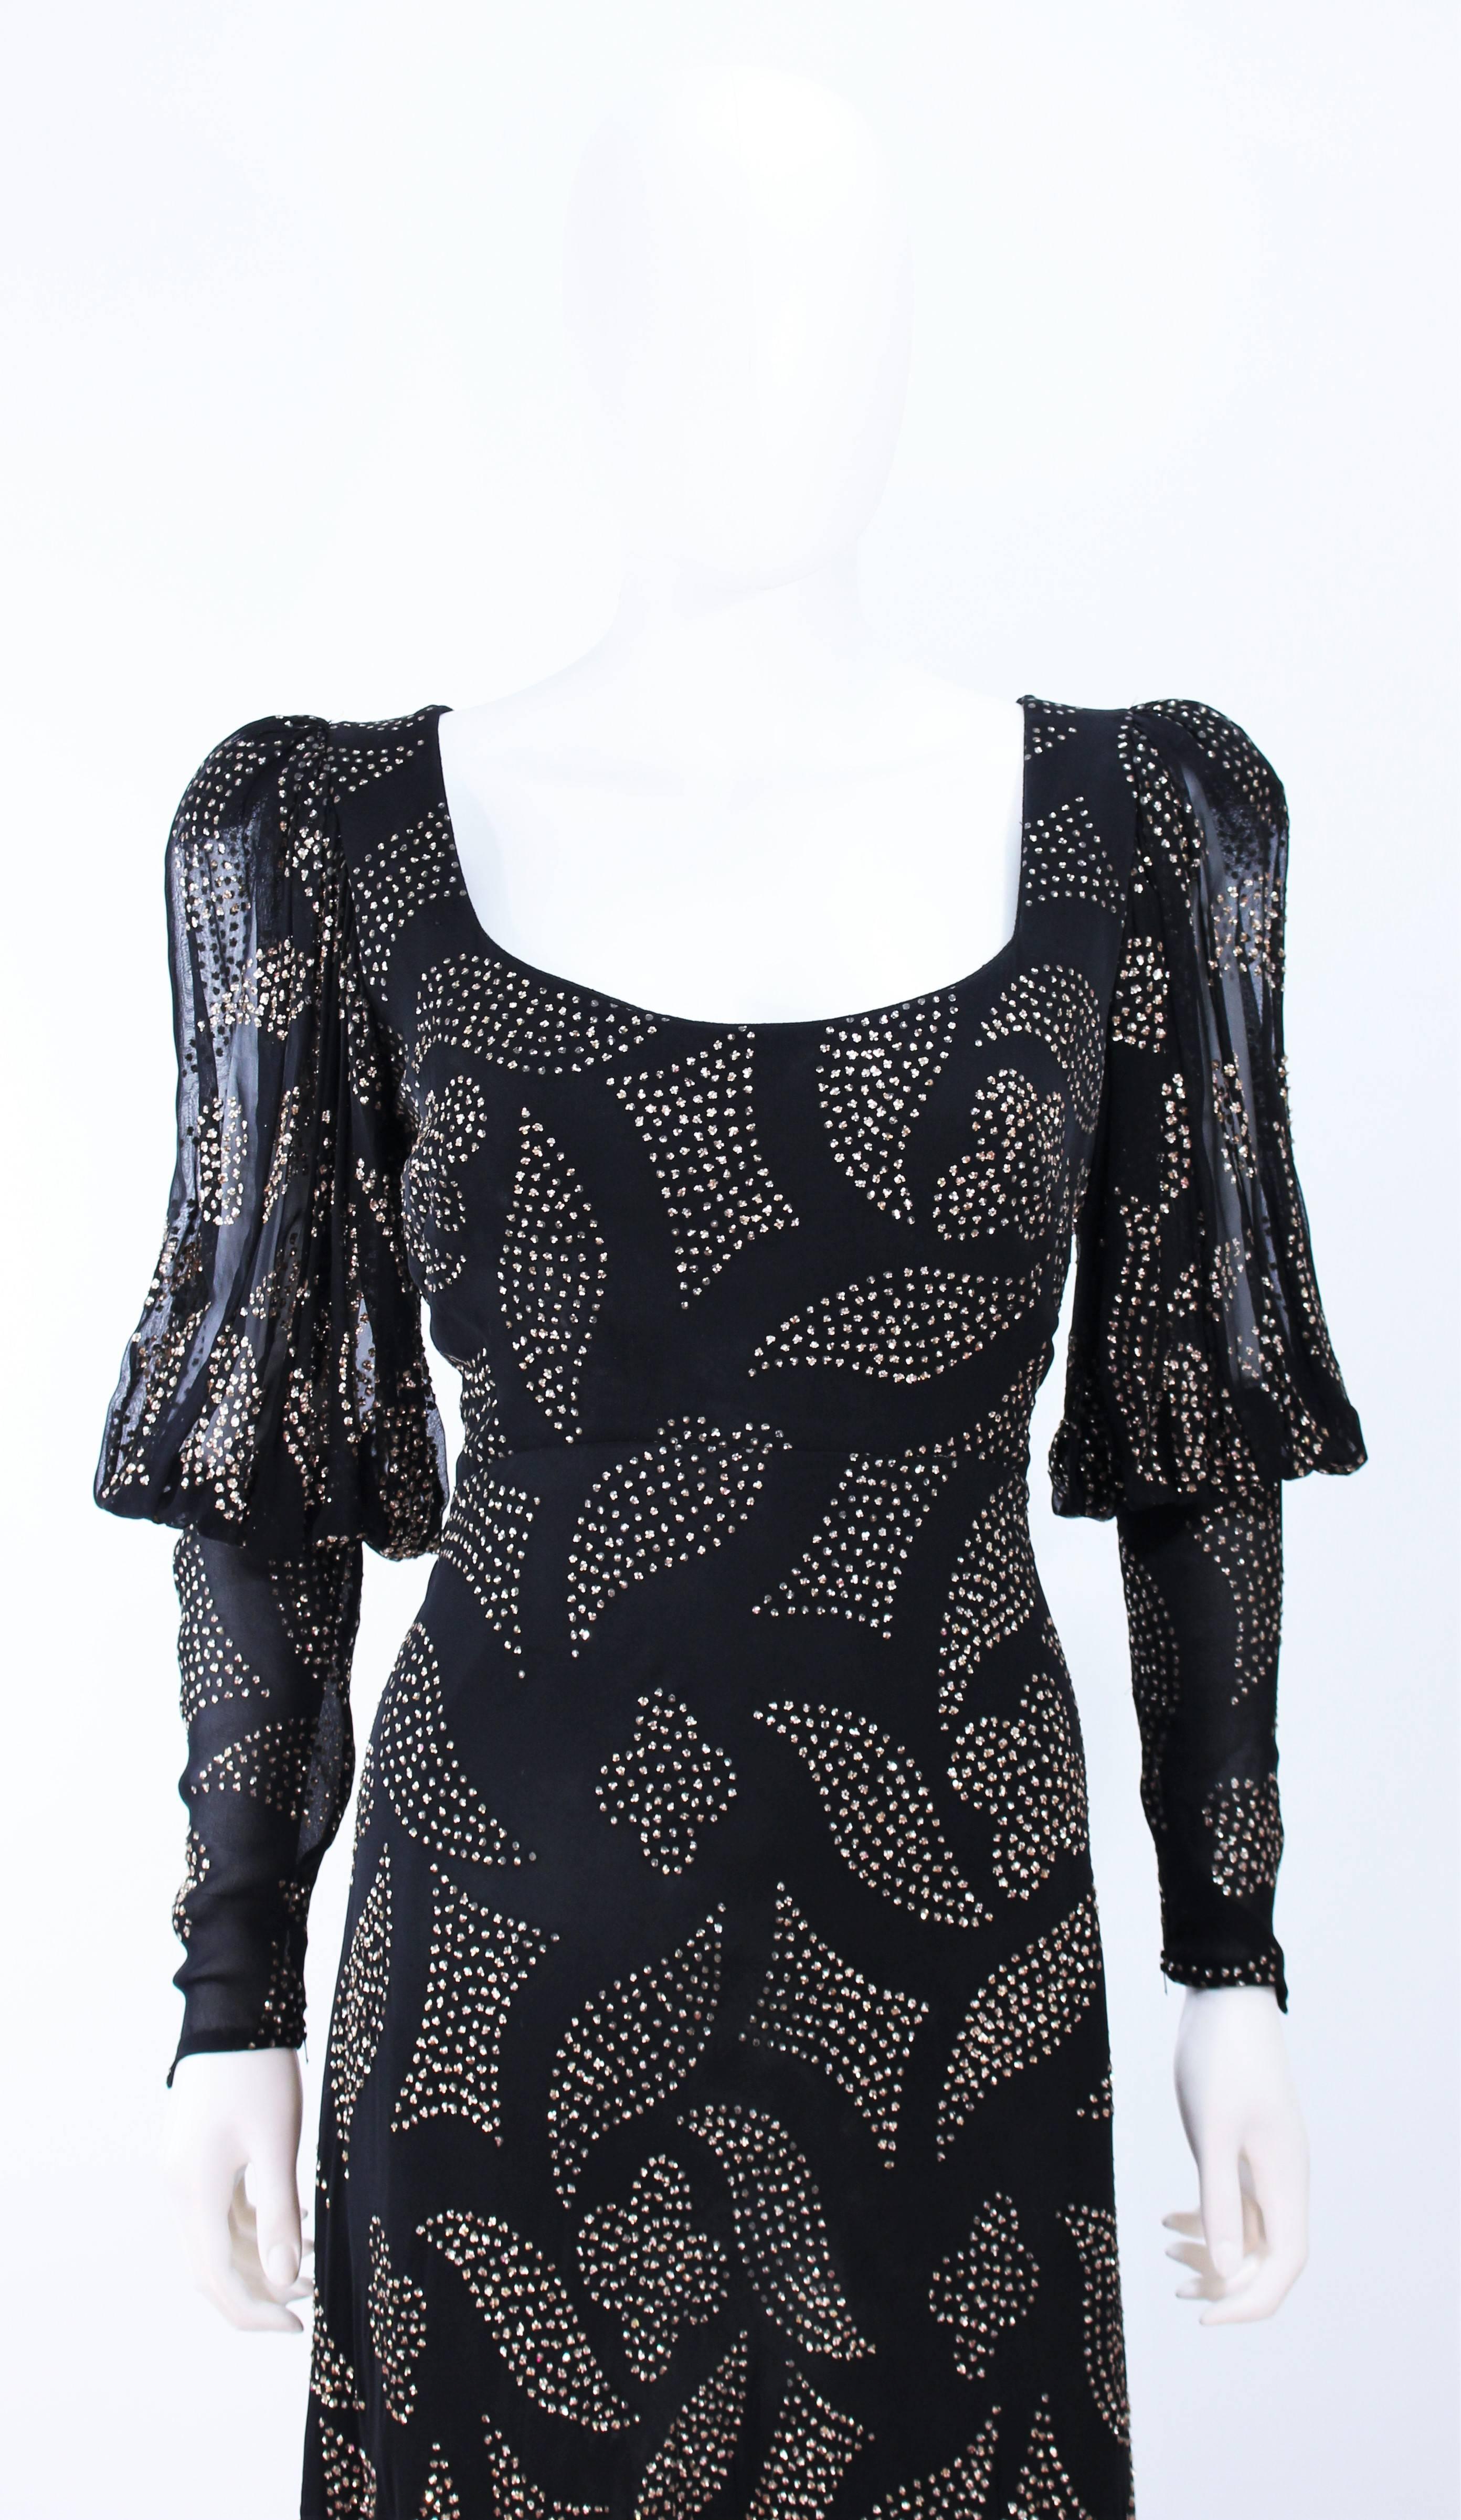 PAULINE TRIGERE 1970's Black Sequin Applique Full Length Dress Size 12 In Excellent Condition For Sale In Los Angeles, CA